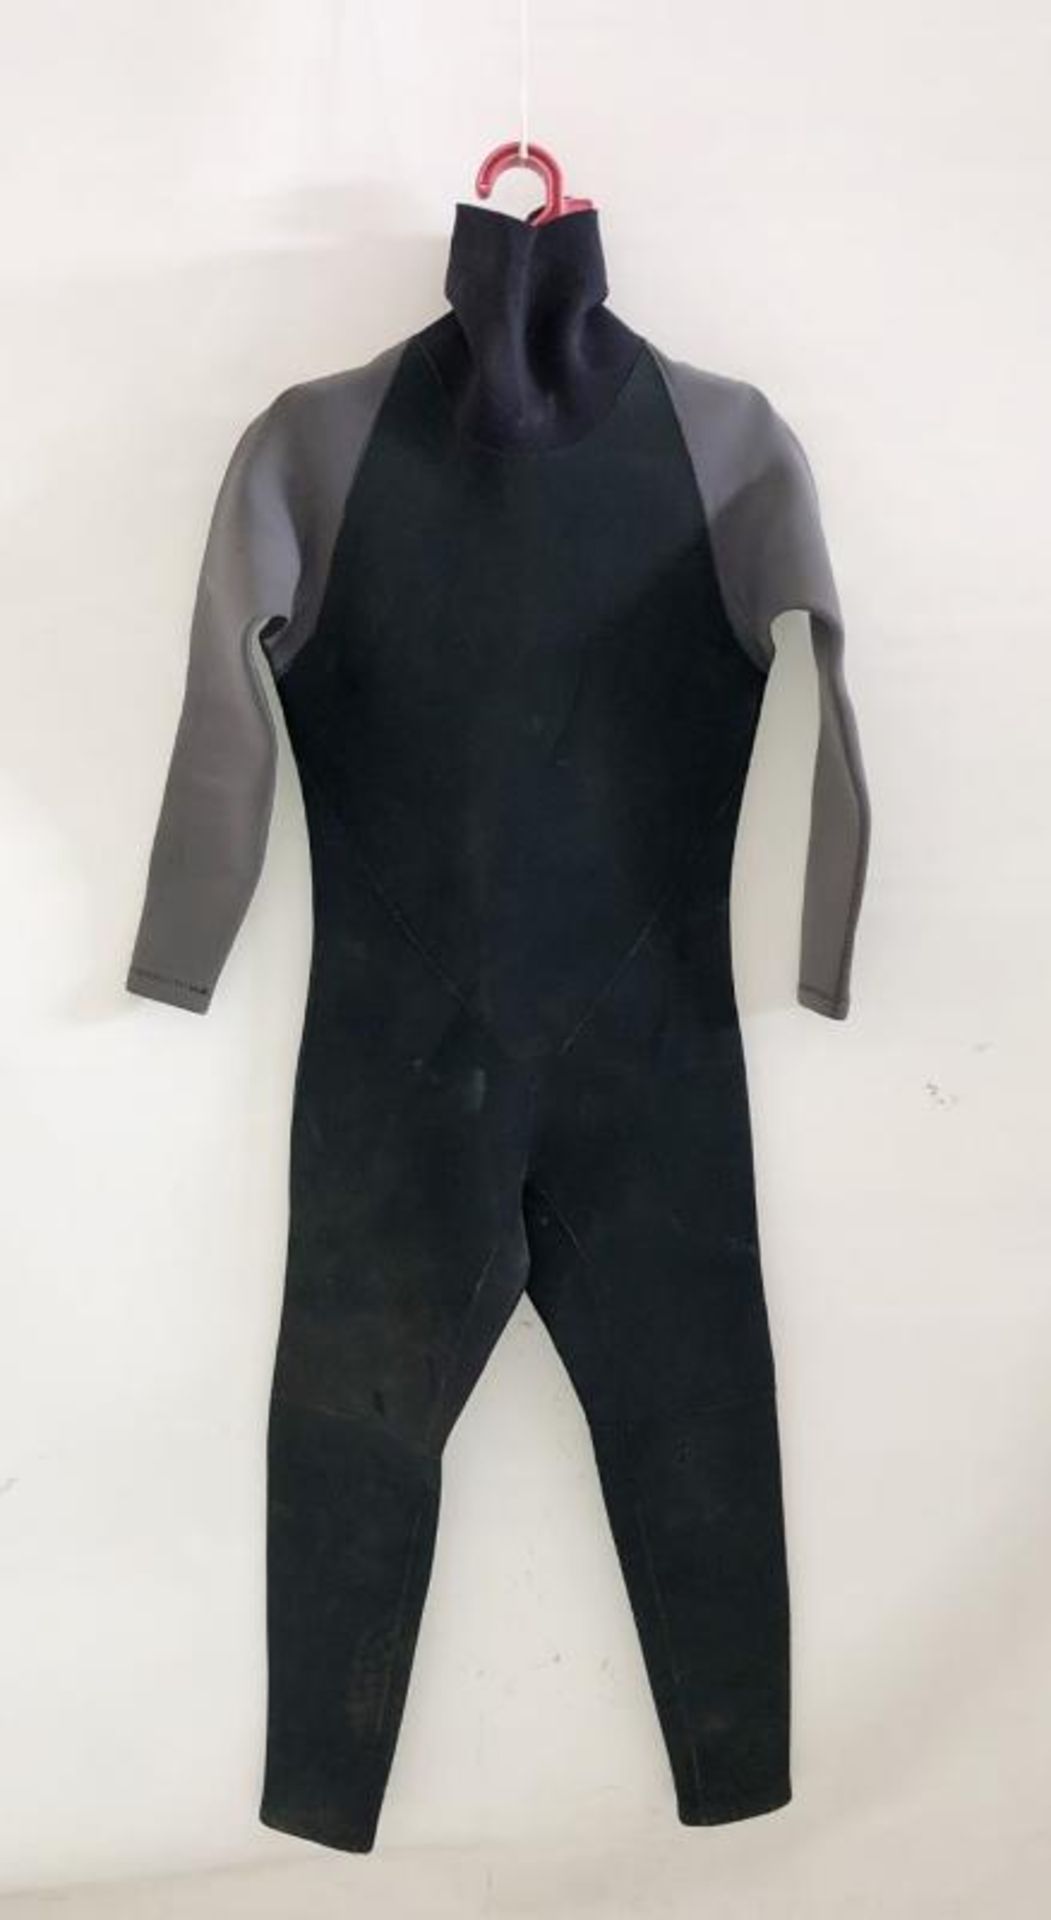 1 x Grey and Black Sola Thousand Island Diving Wetsuit - Ref: NS334 - CL349 - Location: Altrincham W - Image 5 of 5